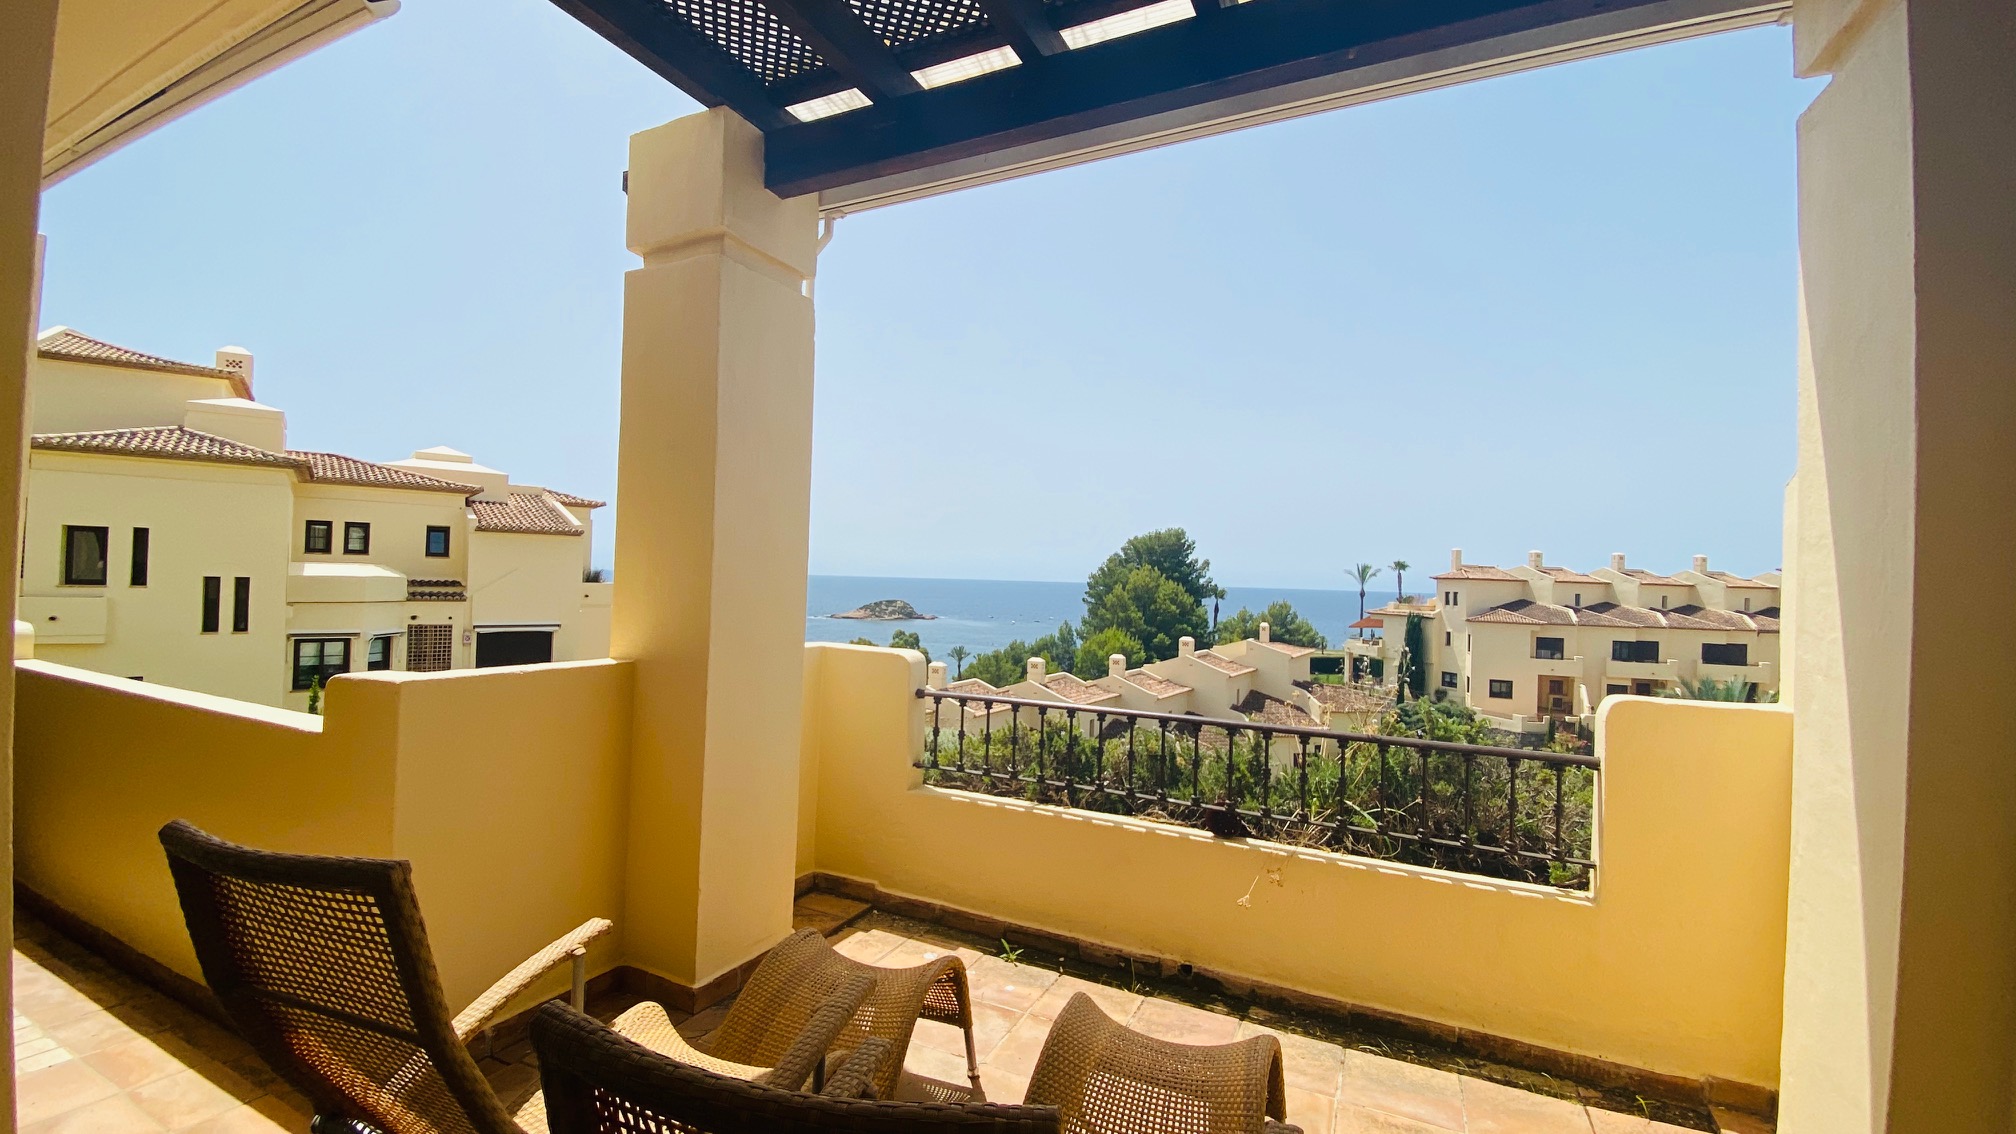 Apartment in residential Villa Gadea de Altea by the sea with two bedrooms and two full bathrooms. Large terrace with beautiful views. Pools and gardens.